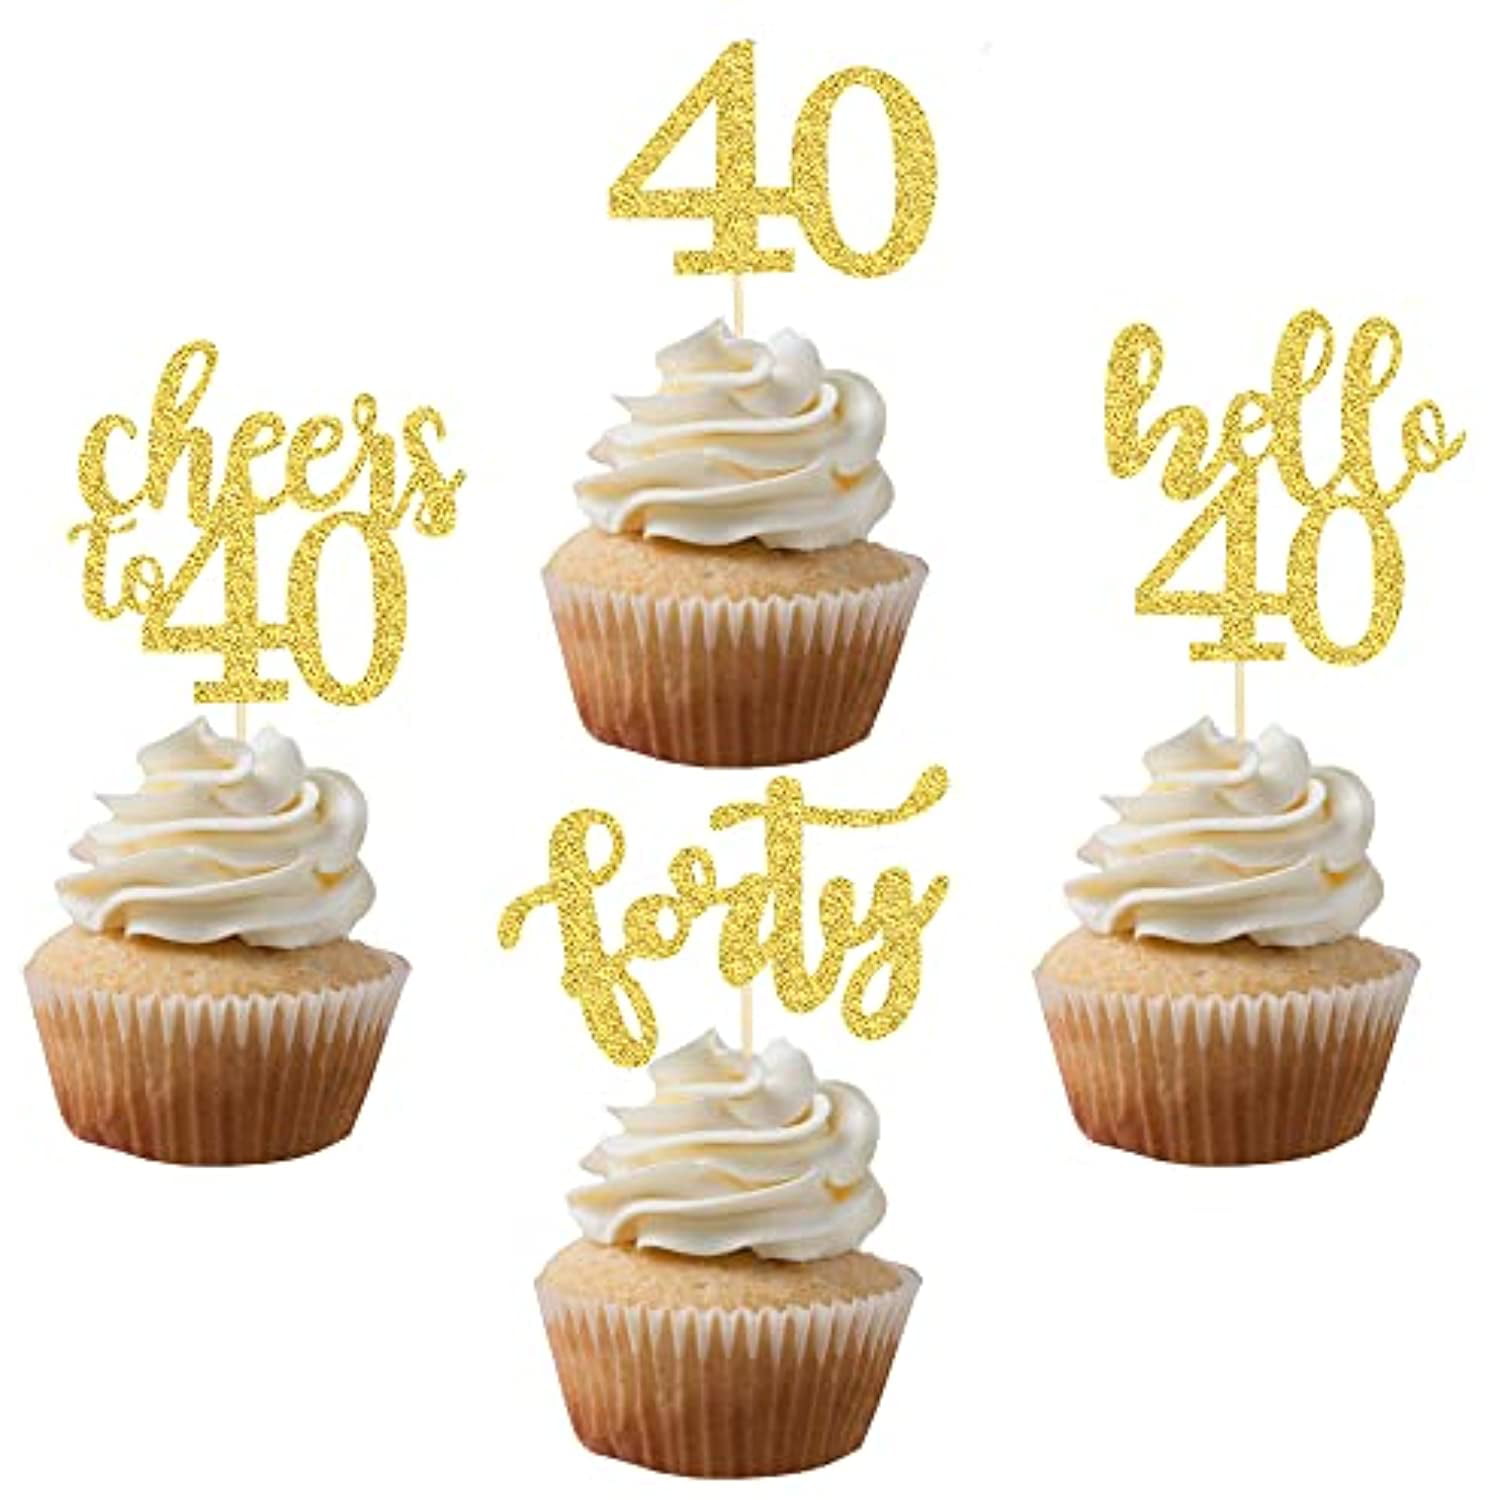 24 CT Gold Glitter Happy Birthday Cupcake Toppers Kids Birthday Party Celebrating Decors 